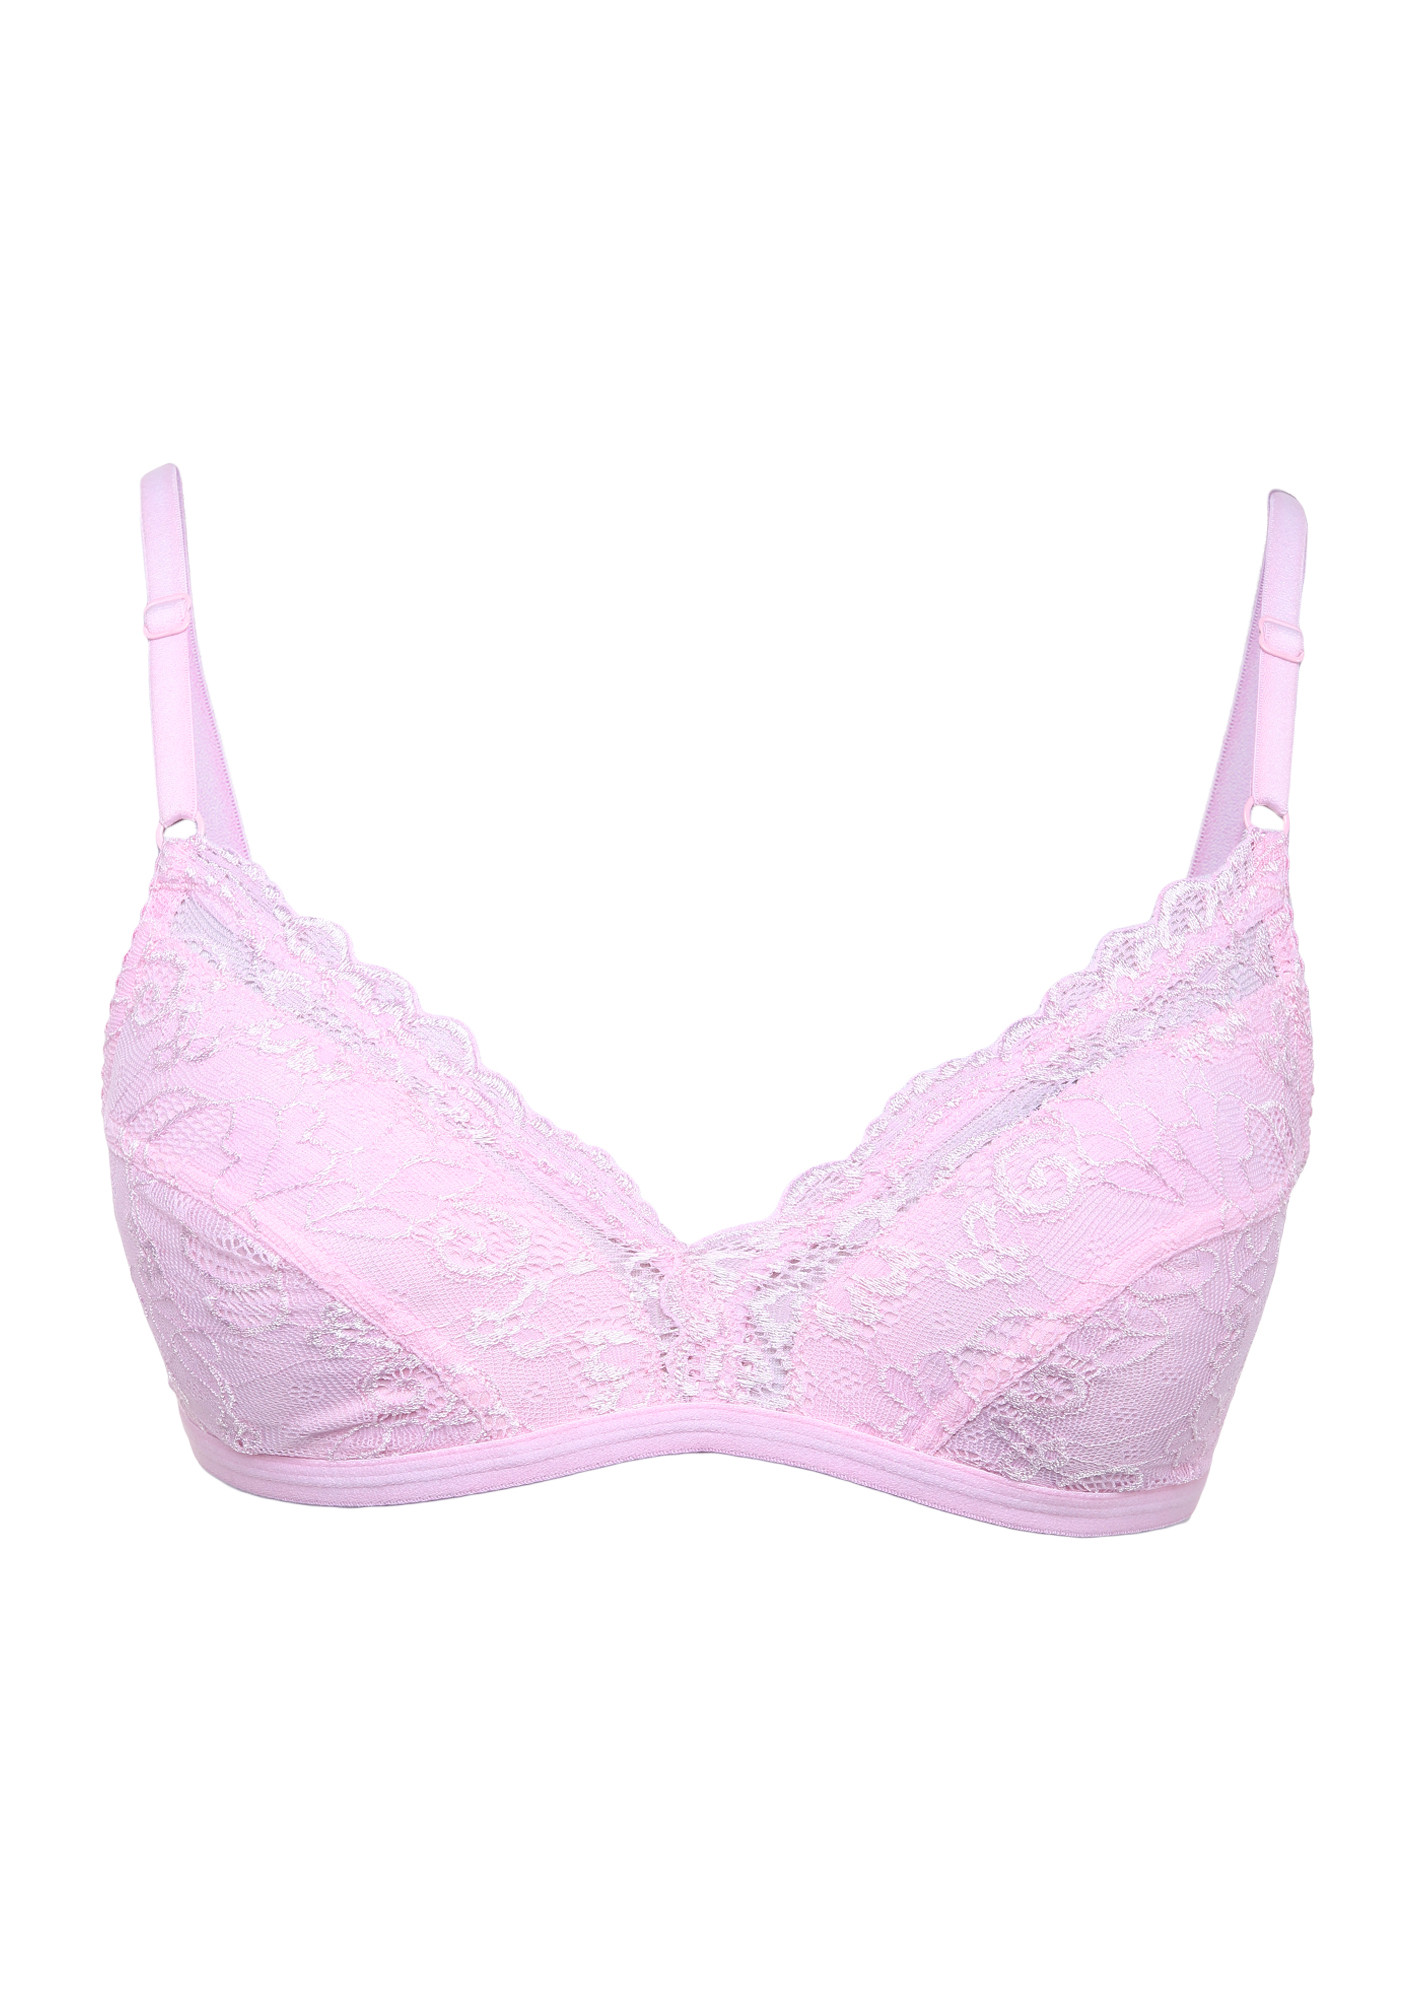 MAGICAL CASTLE NON PADDED NON WIRED LIGHT PINK BRA